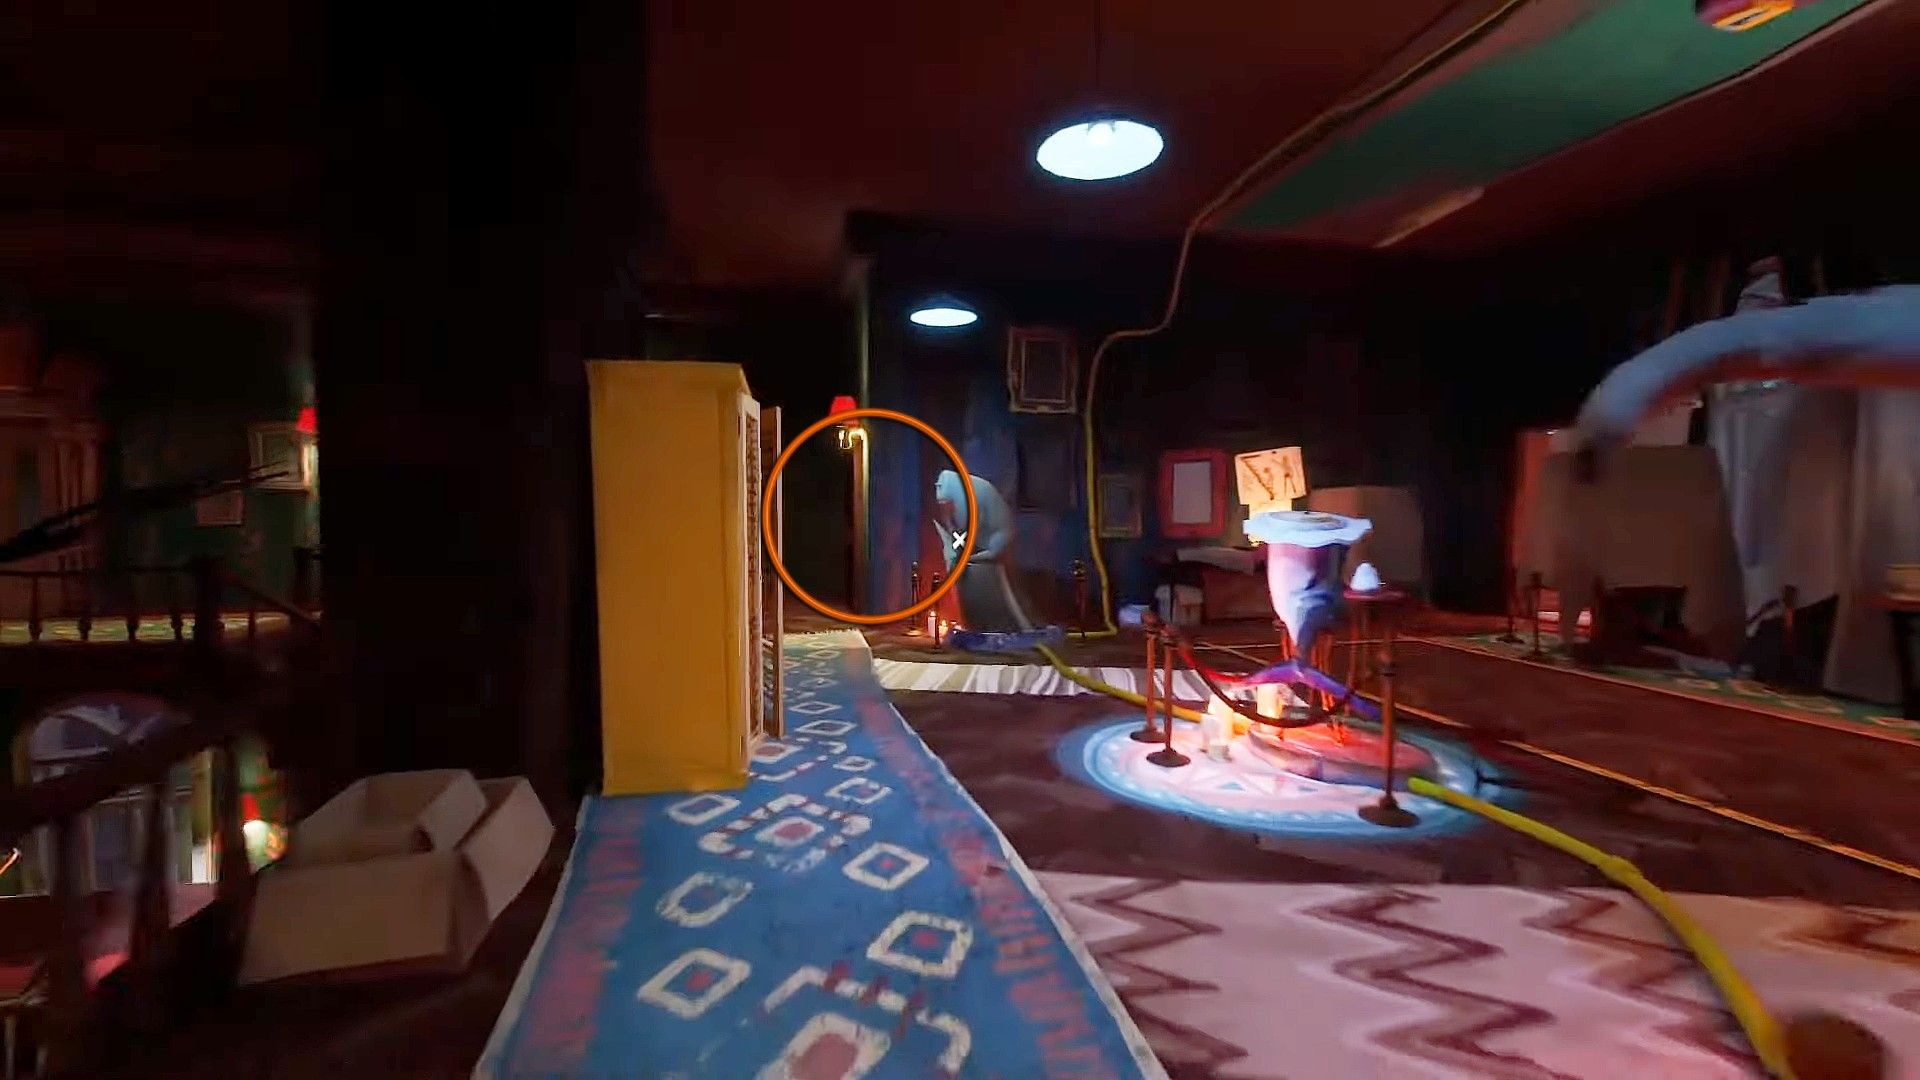 The upstairs landing of the museum in hello neighbor 2